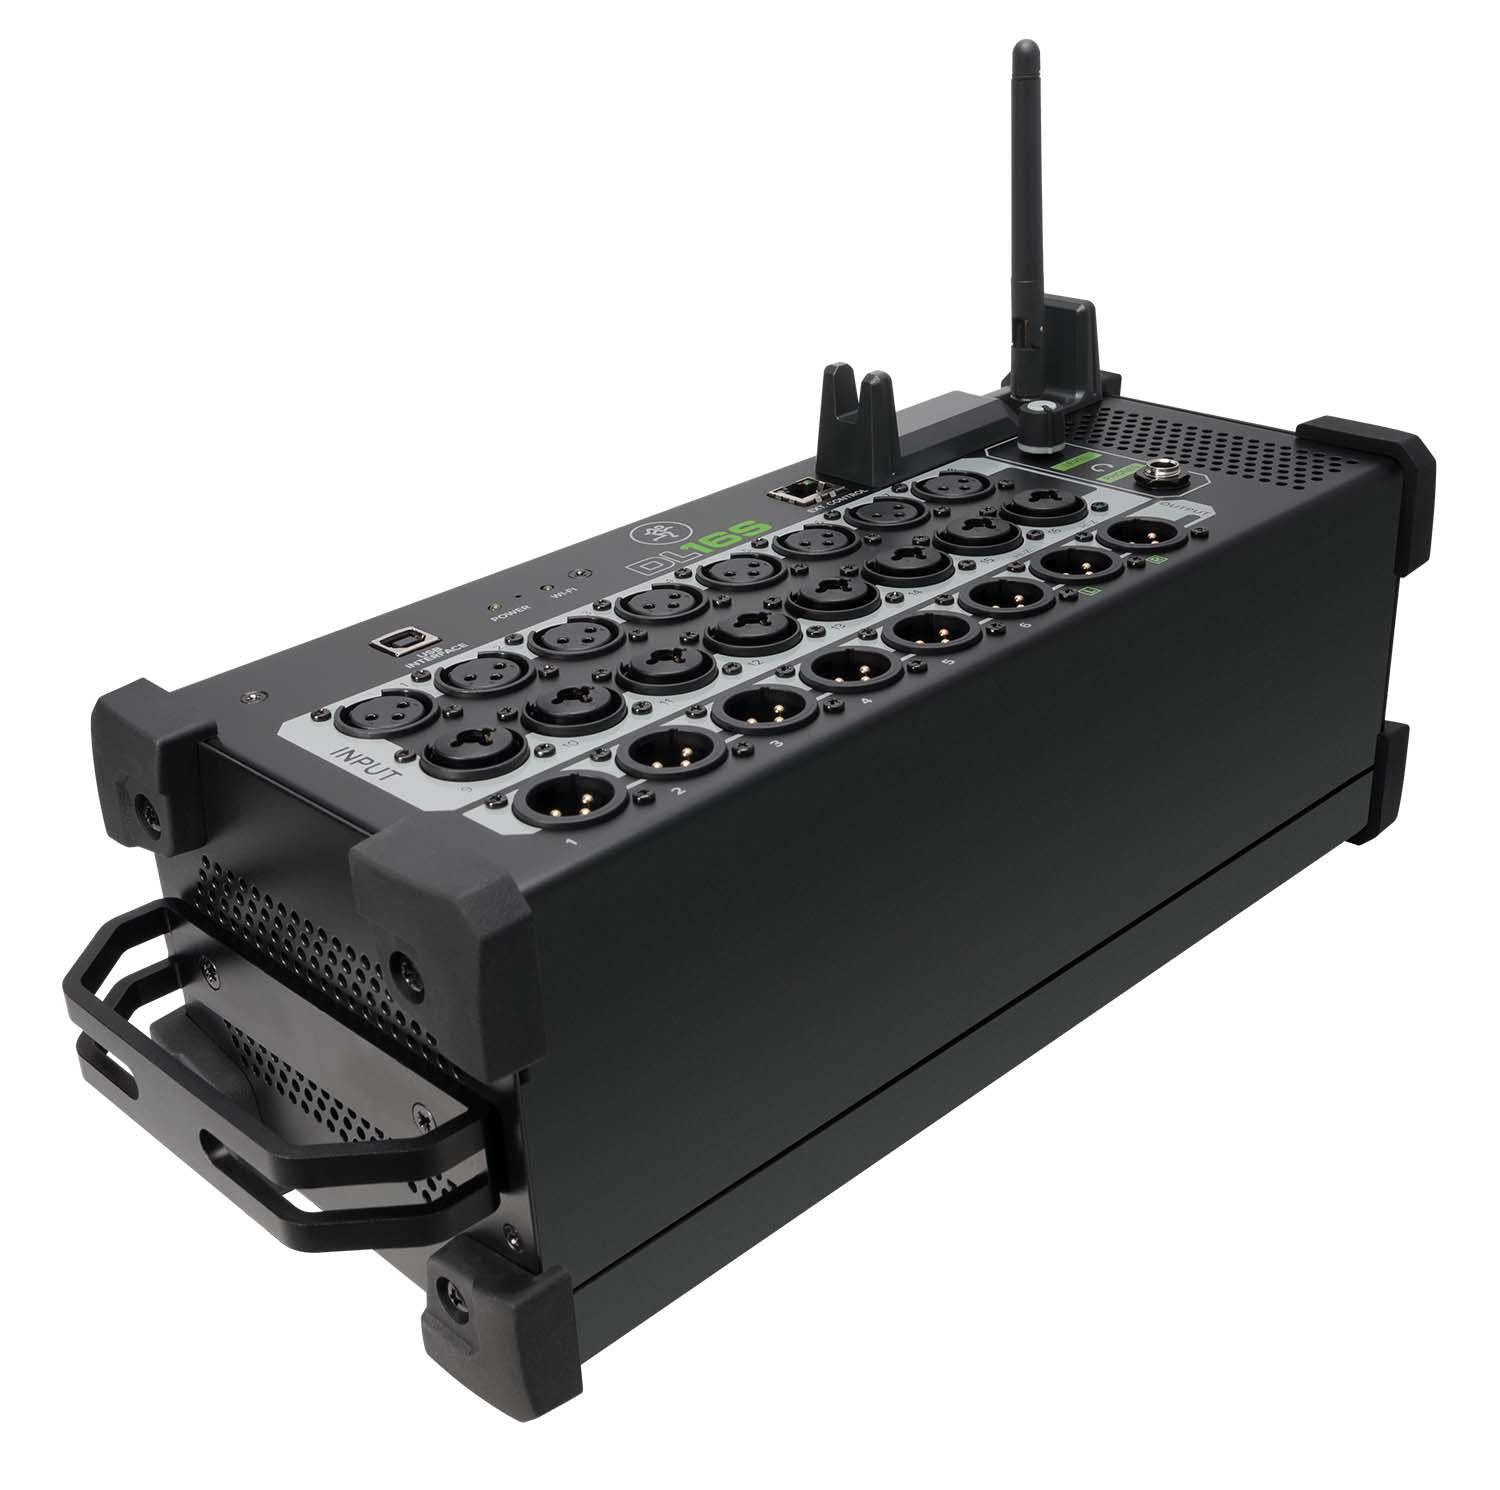 Mackie DL16S 16-Channel Wireless Digital Live Sound Mixer With Built-In Wi-Fi For Multi-Platform Control - Hollywood DJ